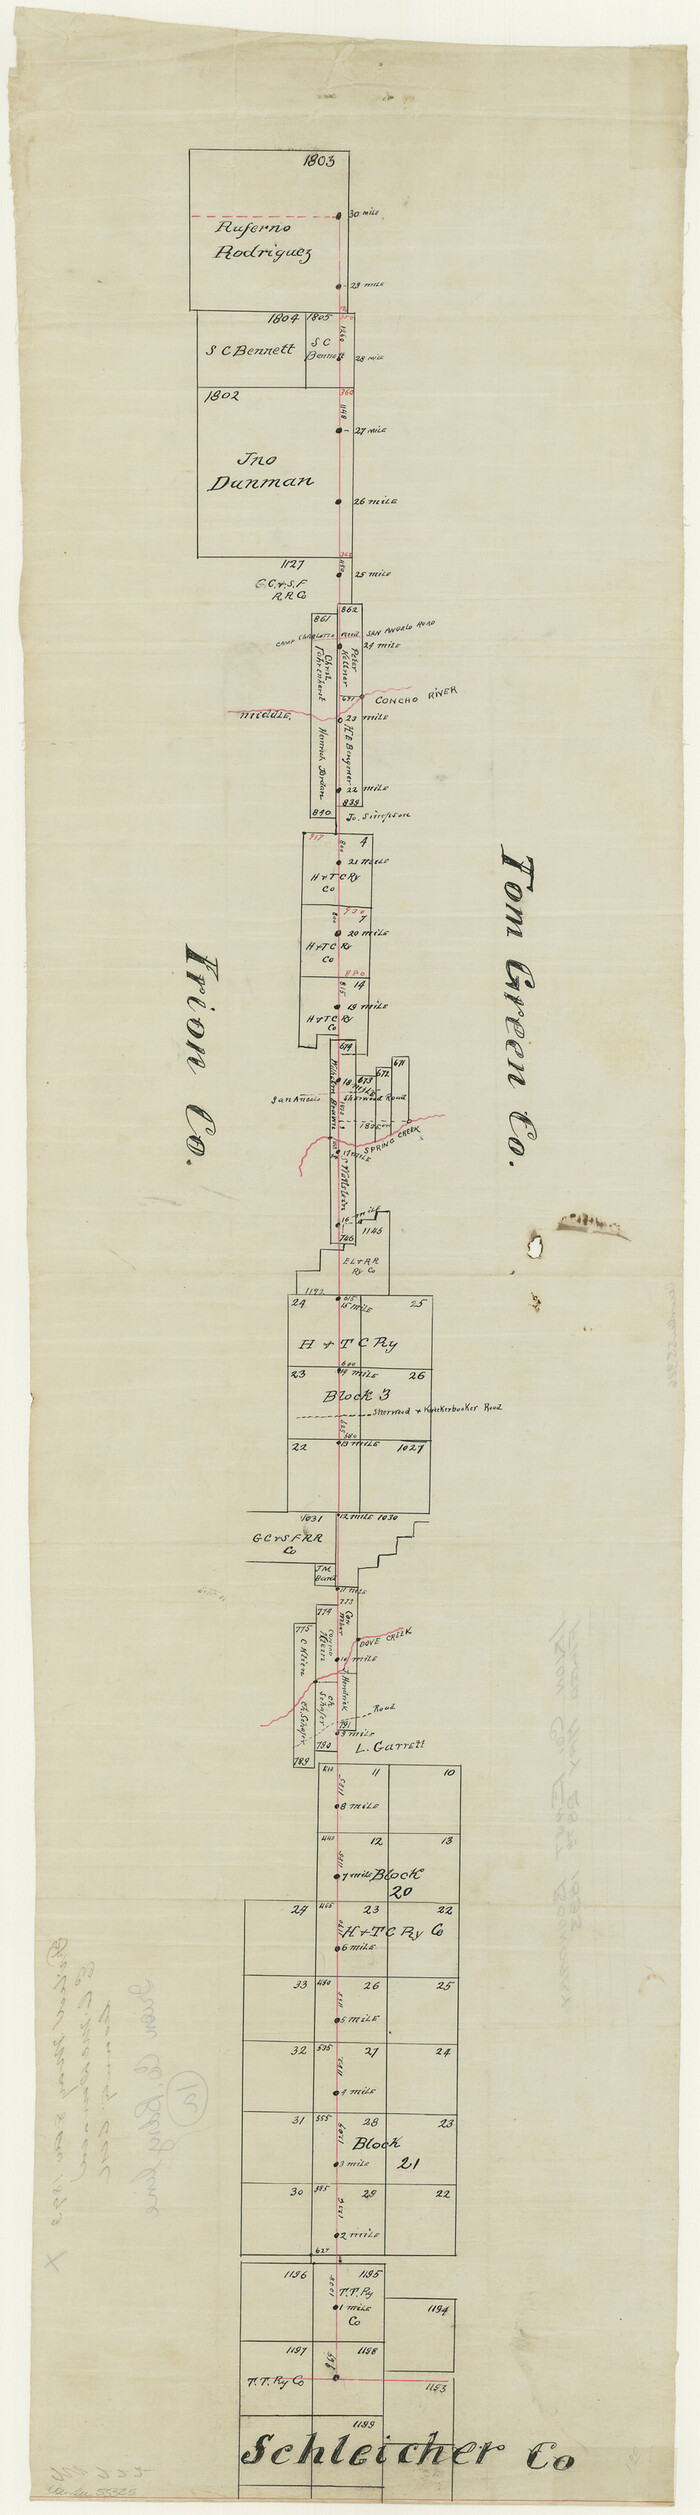 55325, Irion County Boundary File 1a, General Map Collection